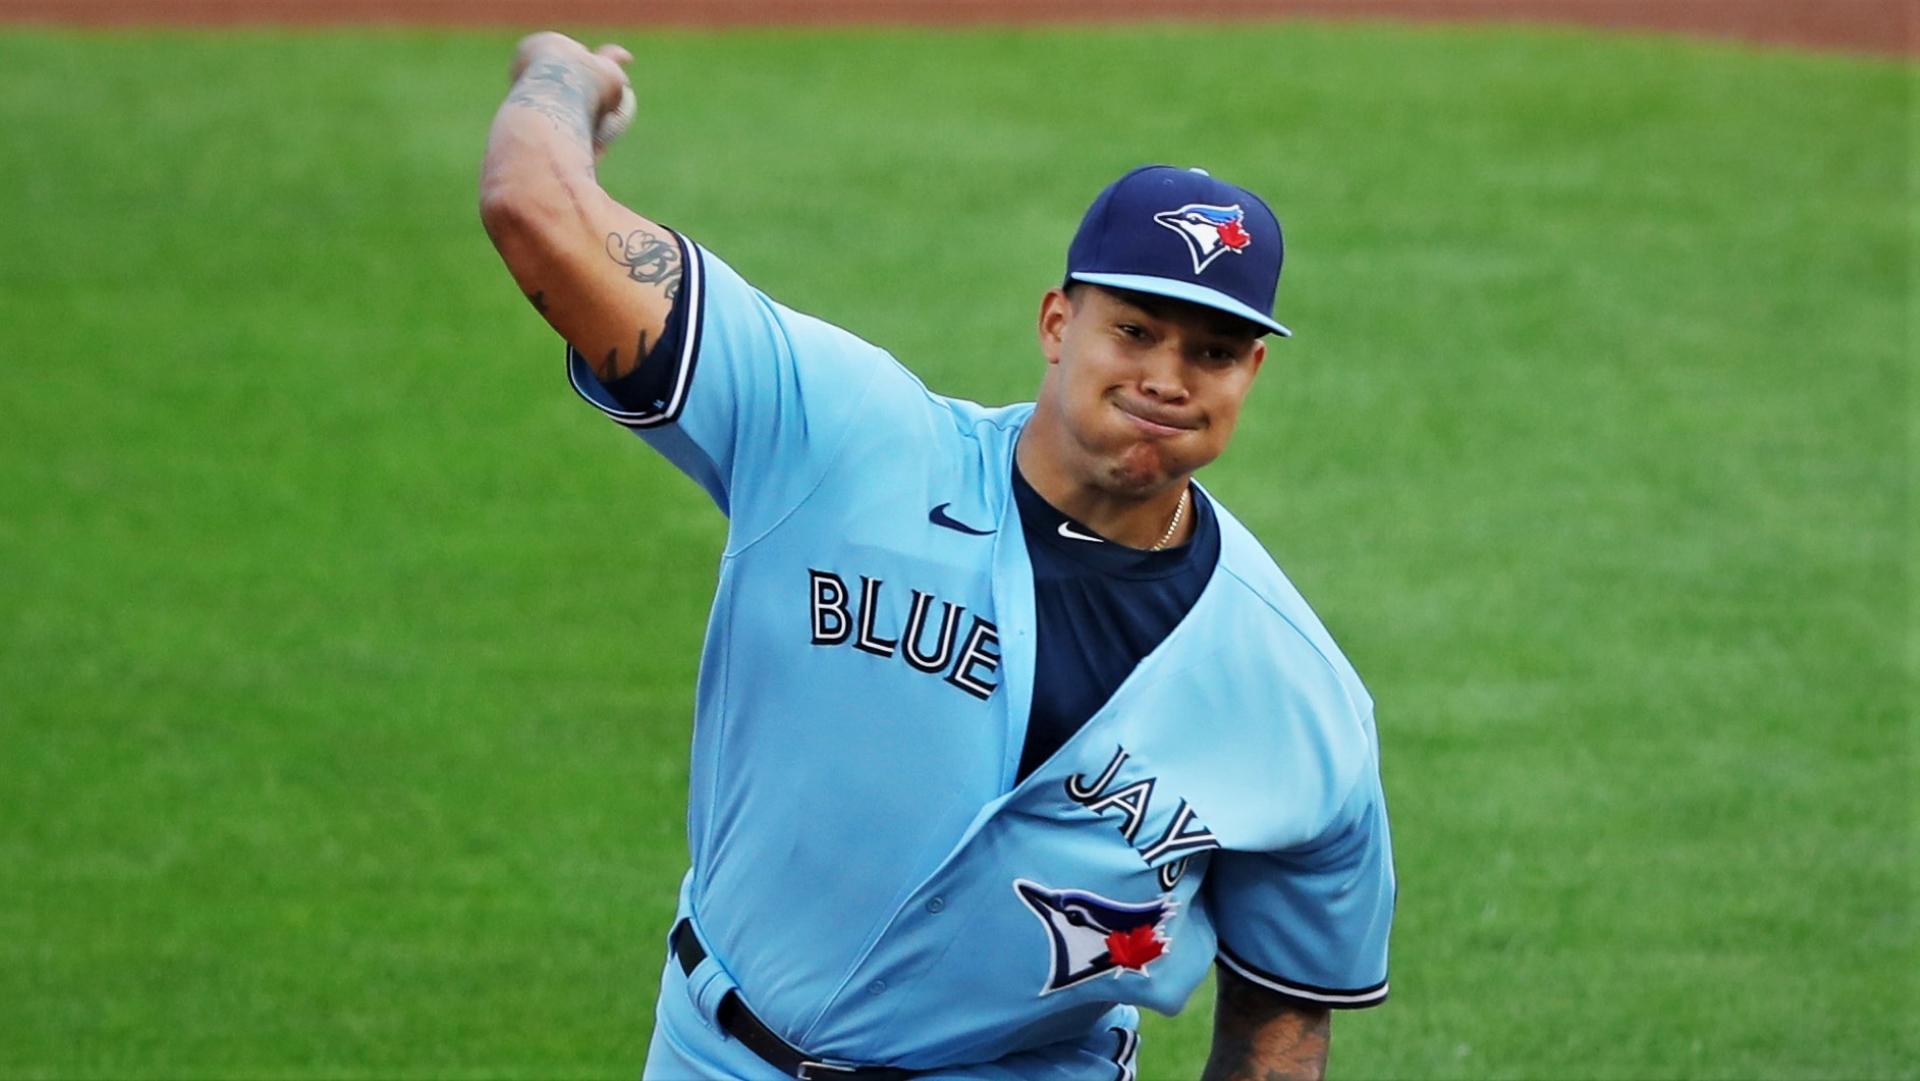 Sep 8, 2020; Buffalo, New York, USA; Toronto Blue Jays starting pitcher Taijuan Walker (00) throws a pitch during the first inning against the New York Yankees at Sahlen Field. Mandatory Credit: Timothy T. Ludwig-USA TODAY Sports / © Timothy T. Ludwig-USA TODAY Sports